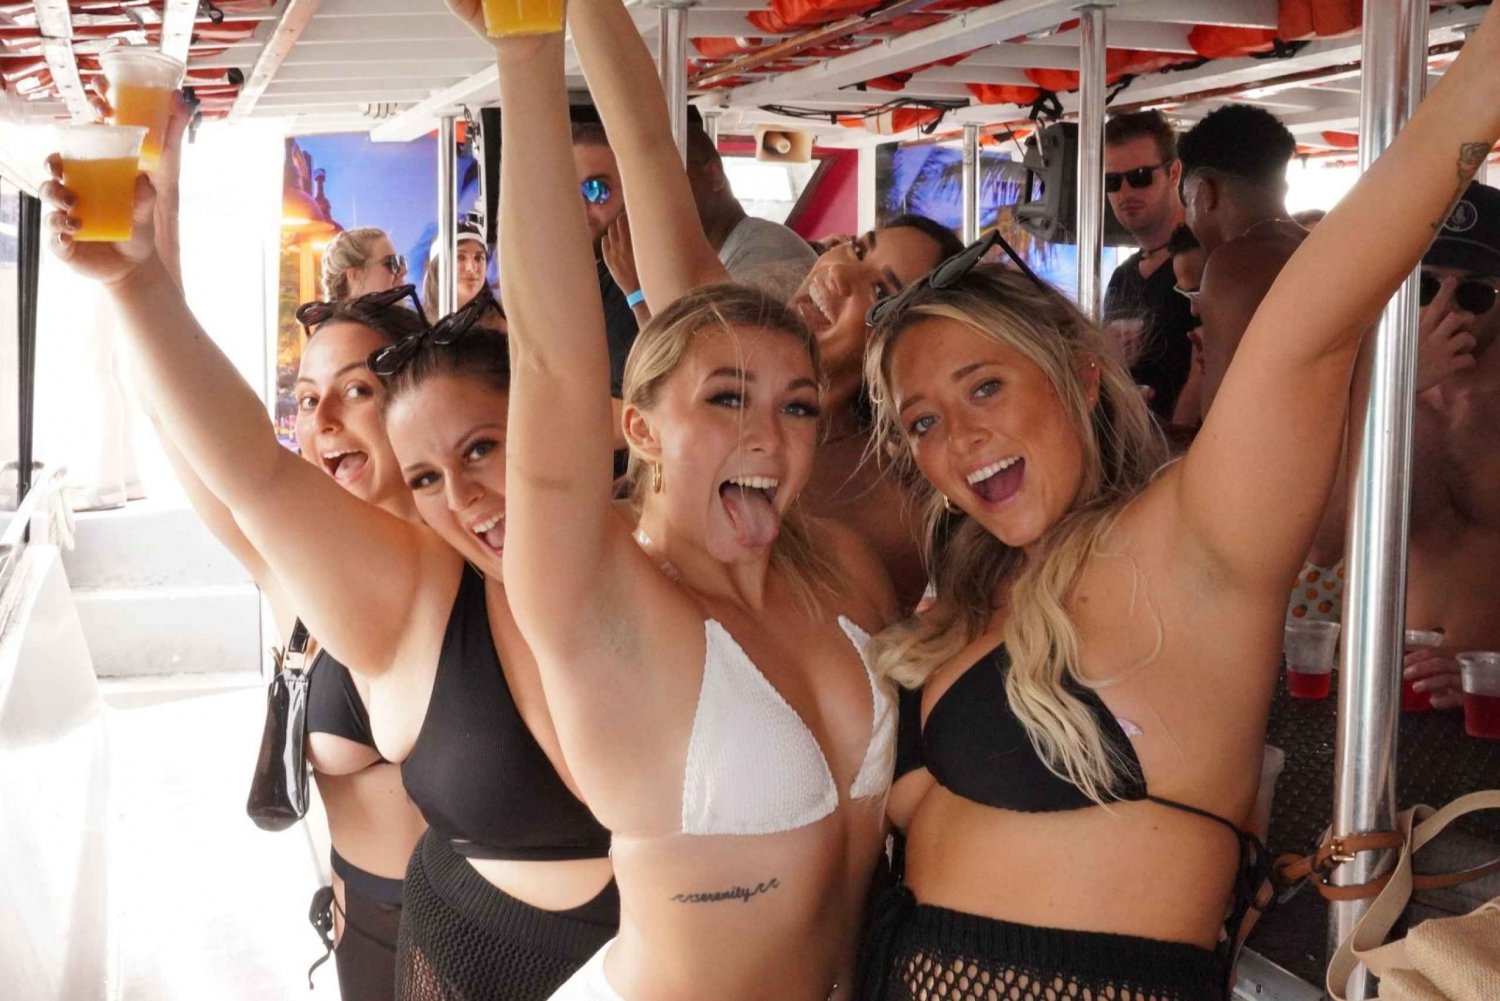 Miami: Boat Party with Live DJ, Unlimited Drinks, and Food